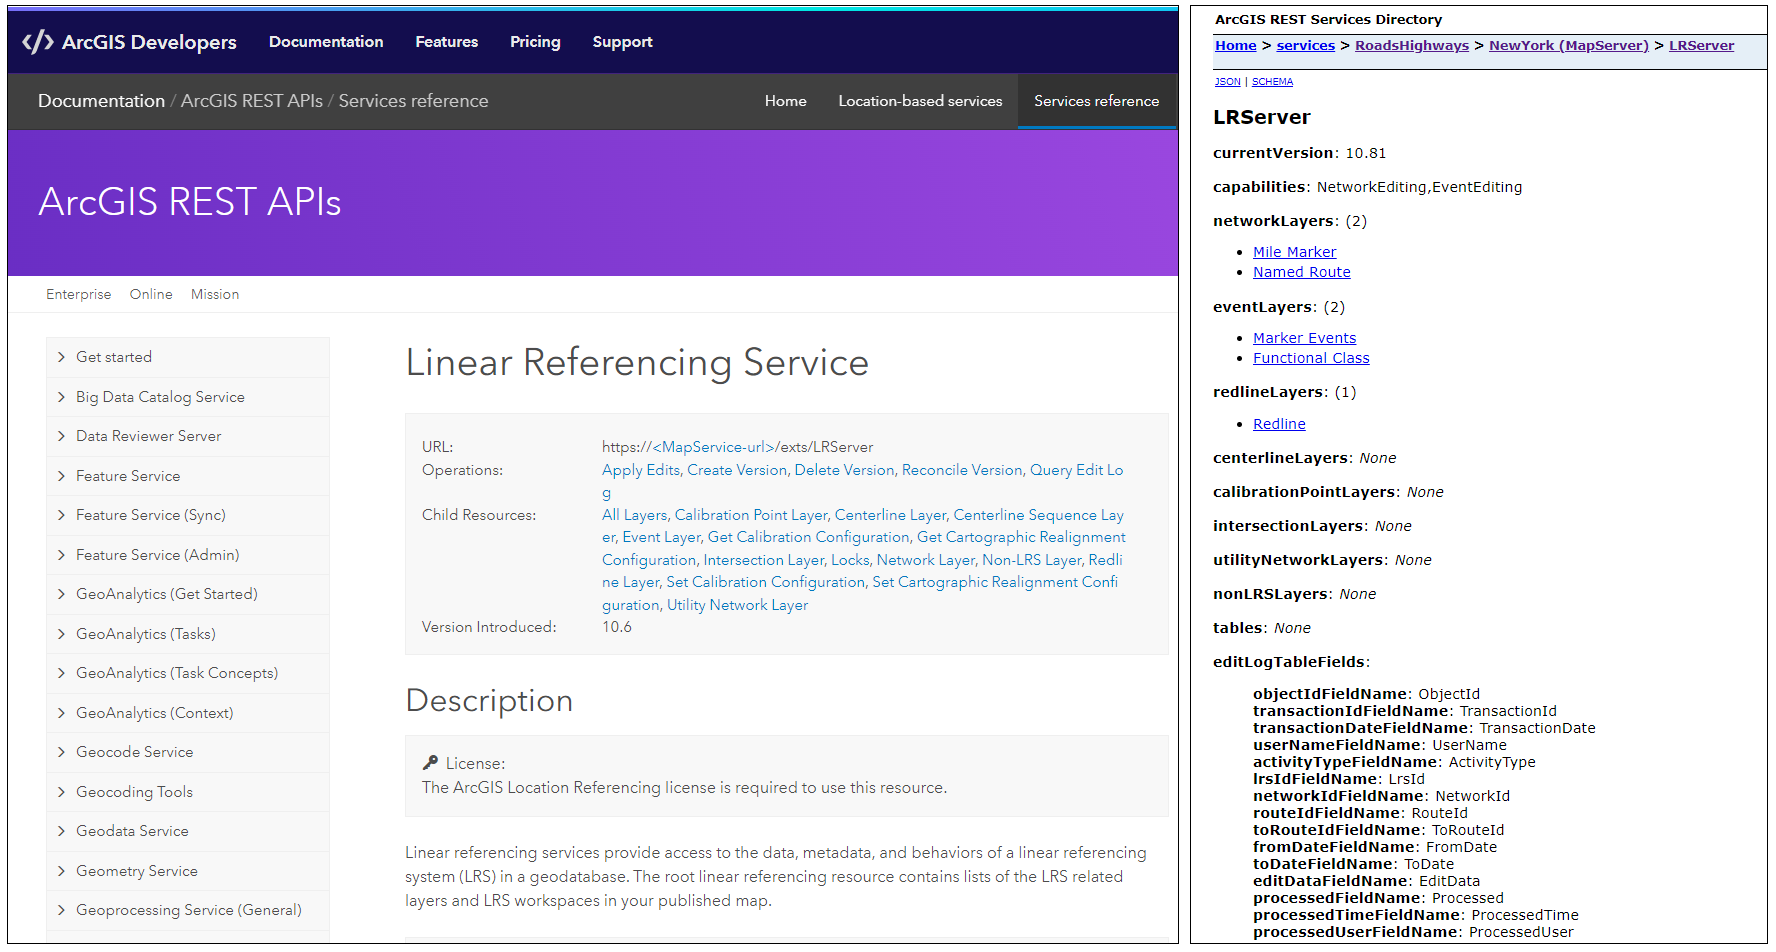 ArcGIS REST API Linear Referencing capability documentation.